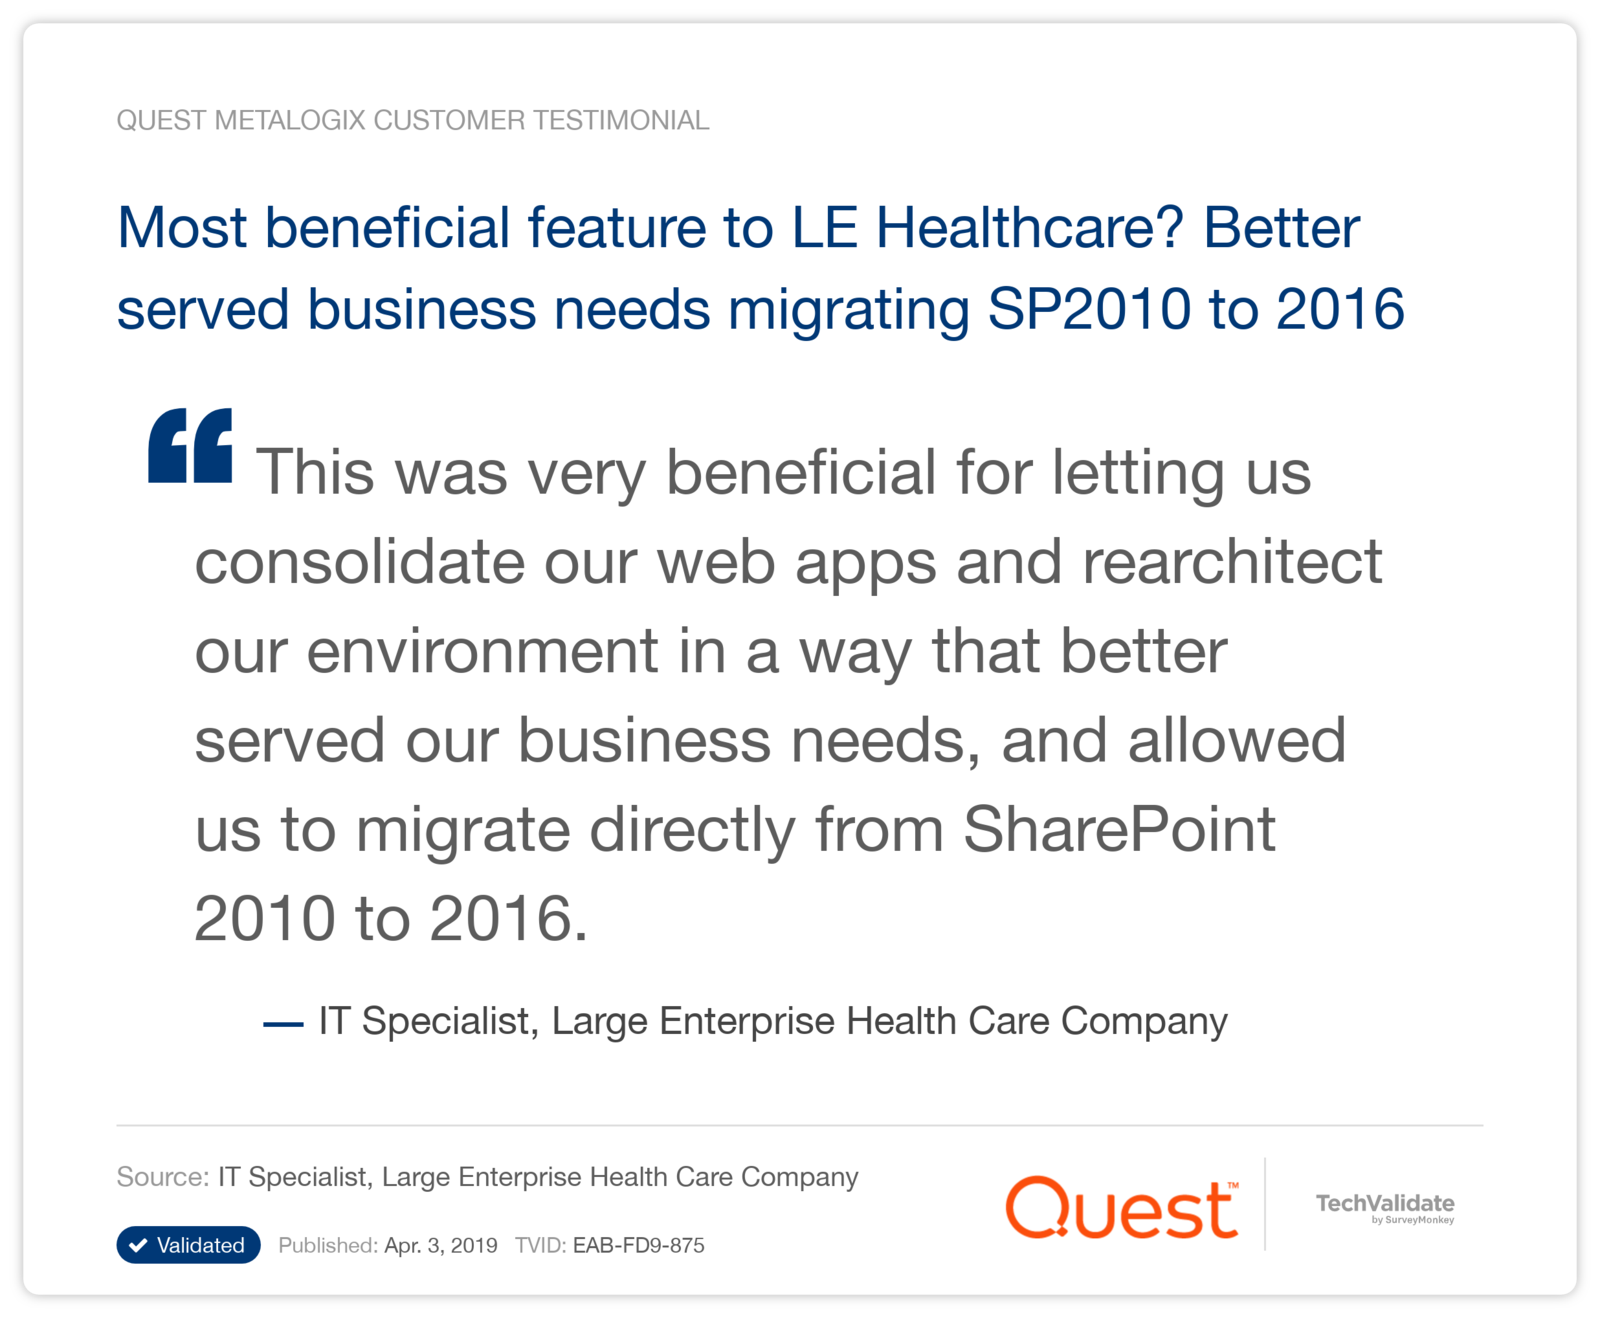 Most beneficial feature to LE Healthcare? Better served business needs migrating SP2010 to 2016